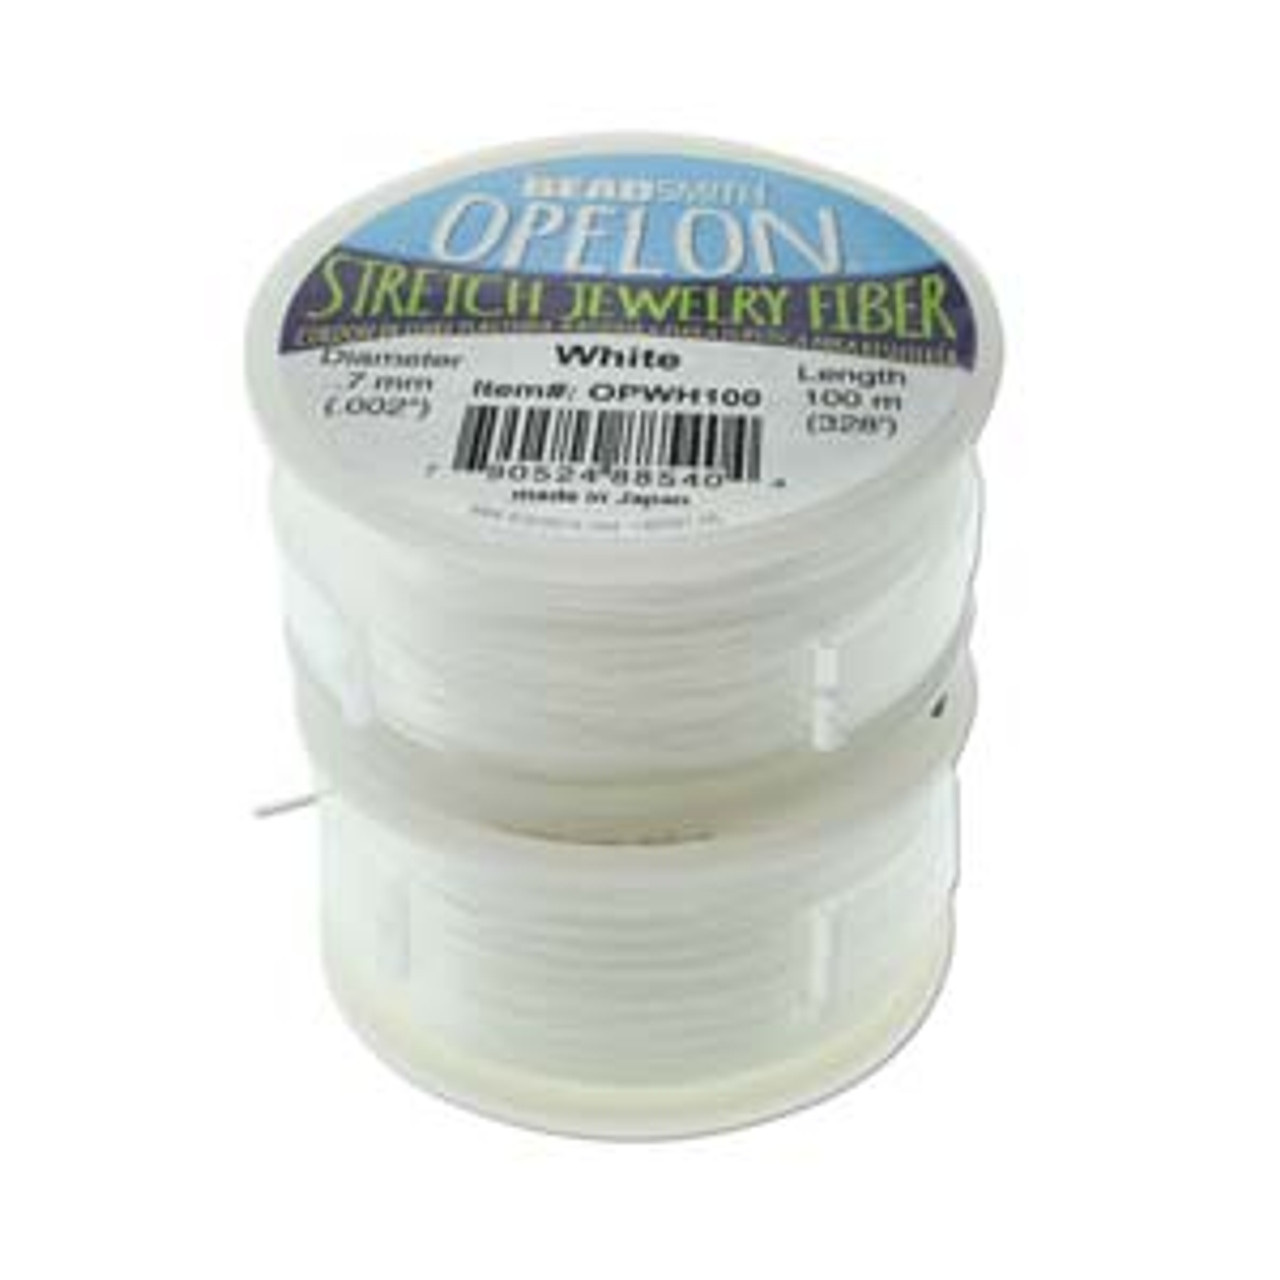 Clear Stretch Magic, .5mm Diameter X 10 Meters Length Stretchy Craft Cord  String Free Shipping 